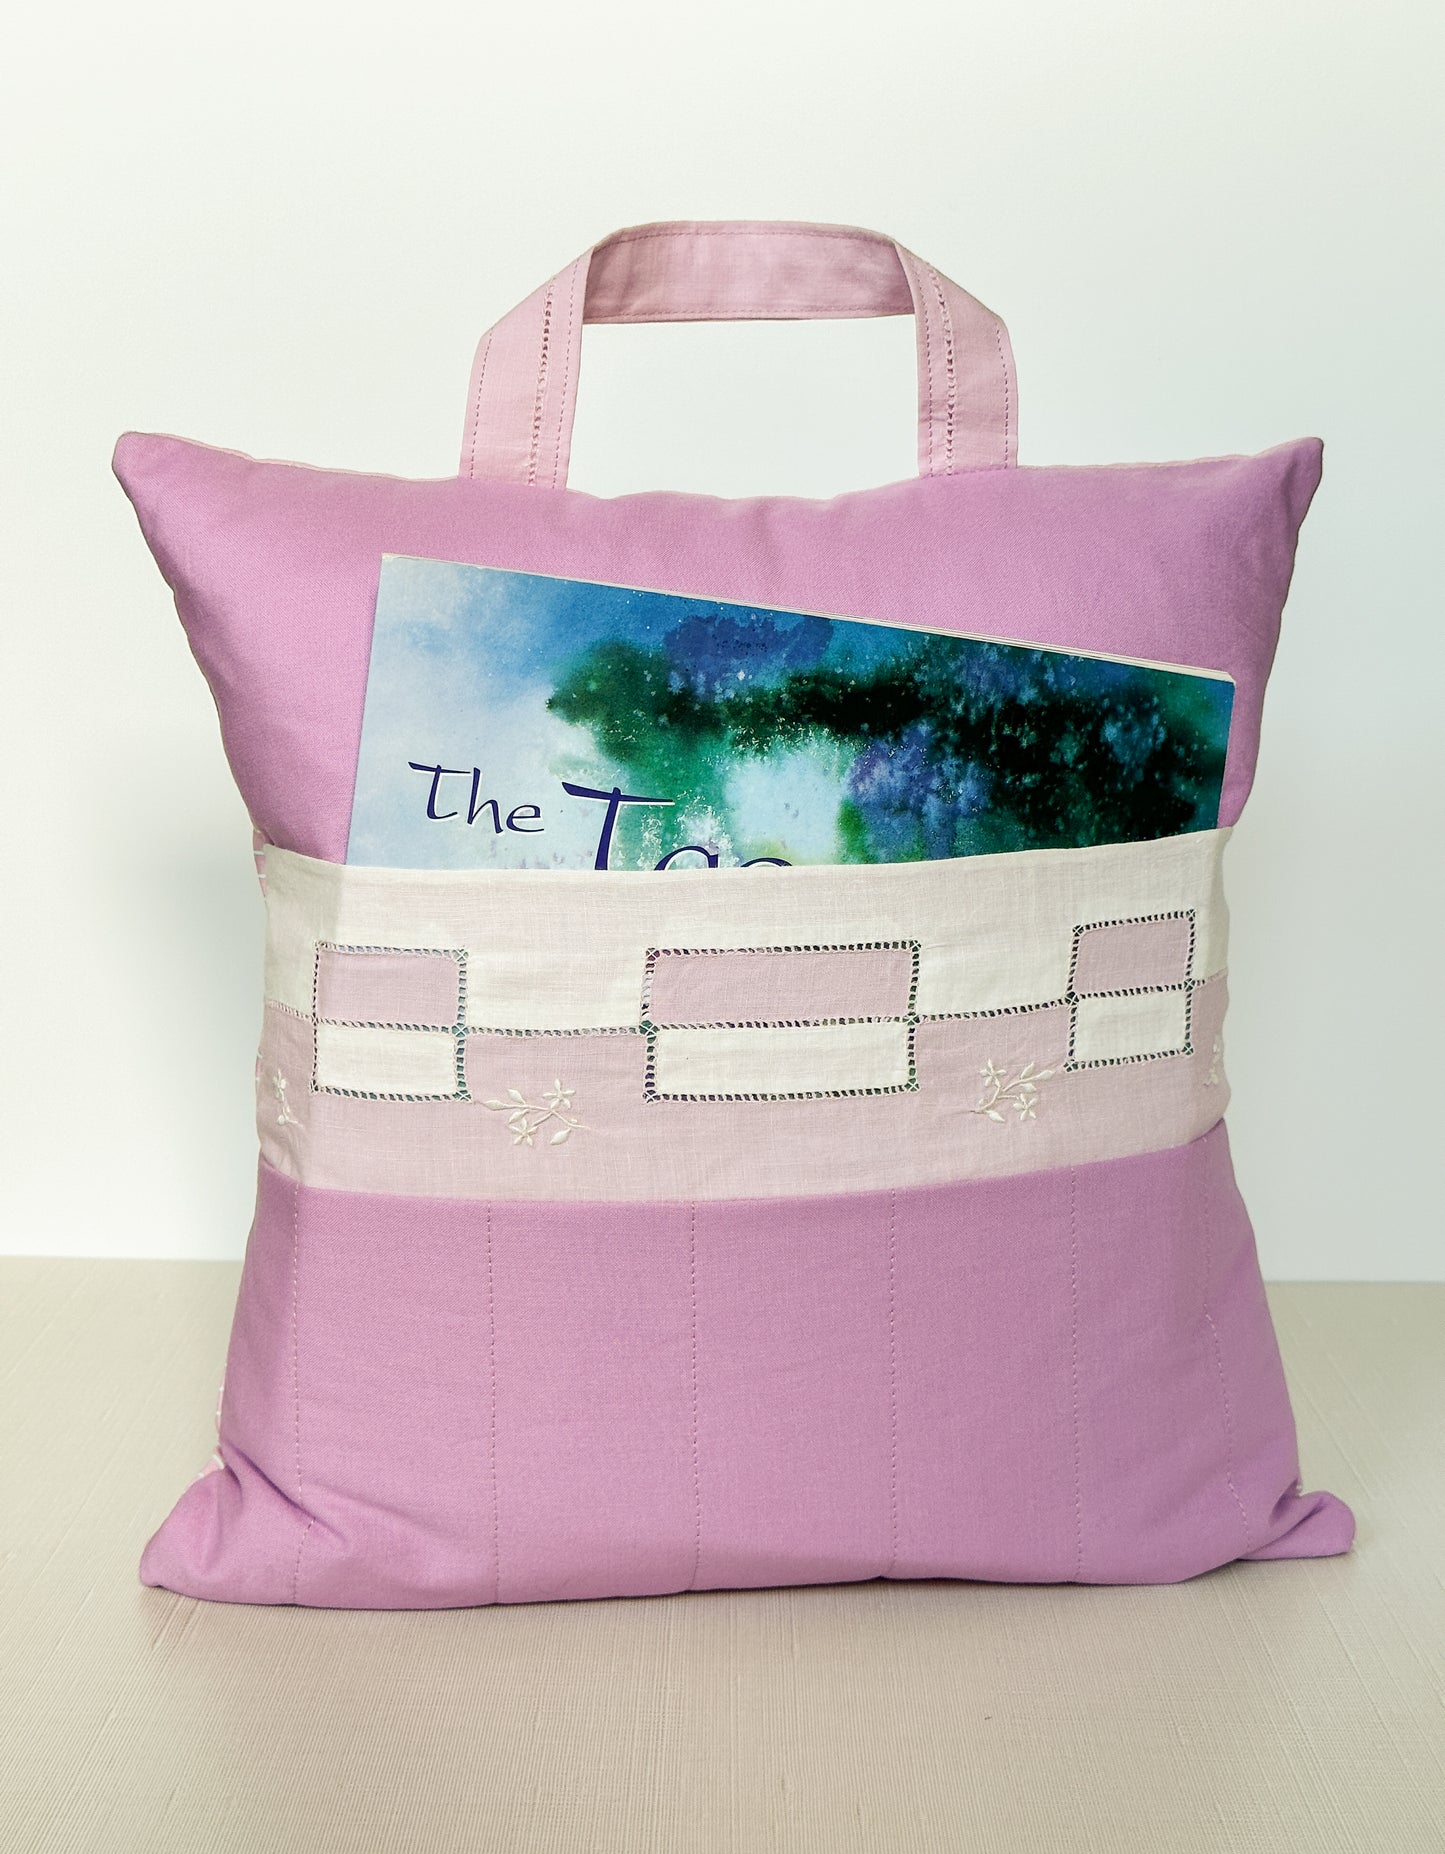 Vintage Pillow in Pink & White with Pocket & Carry Handle